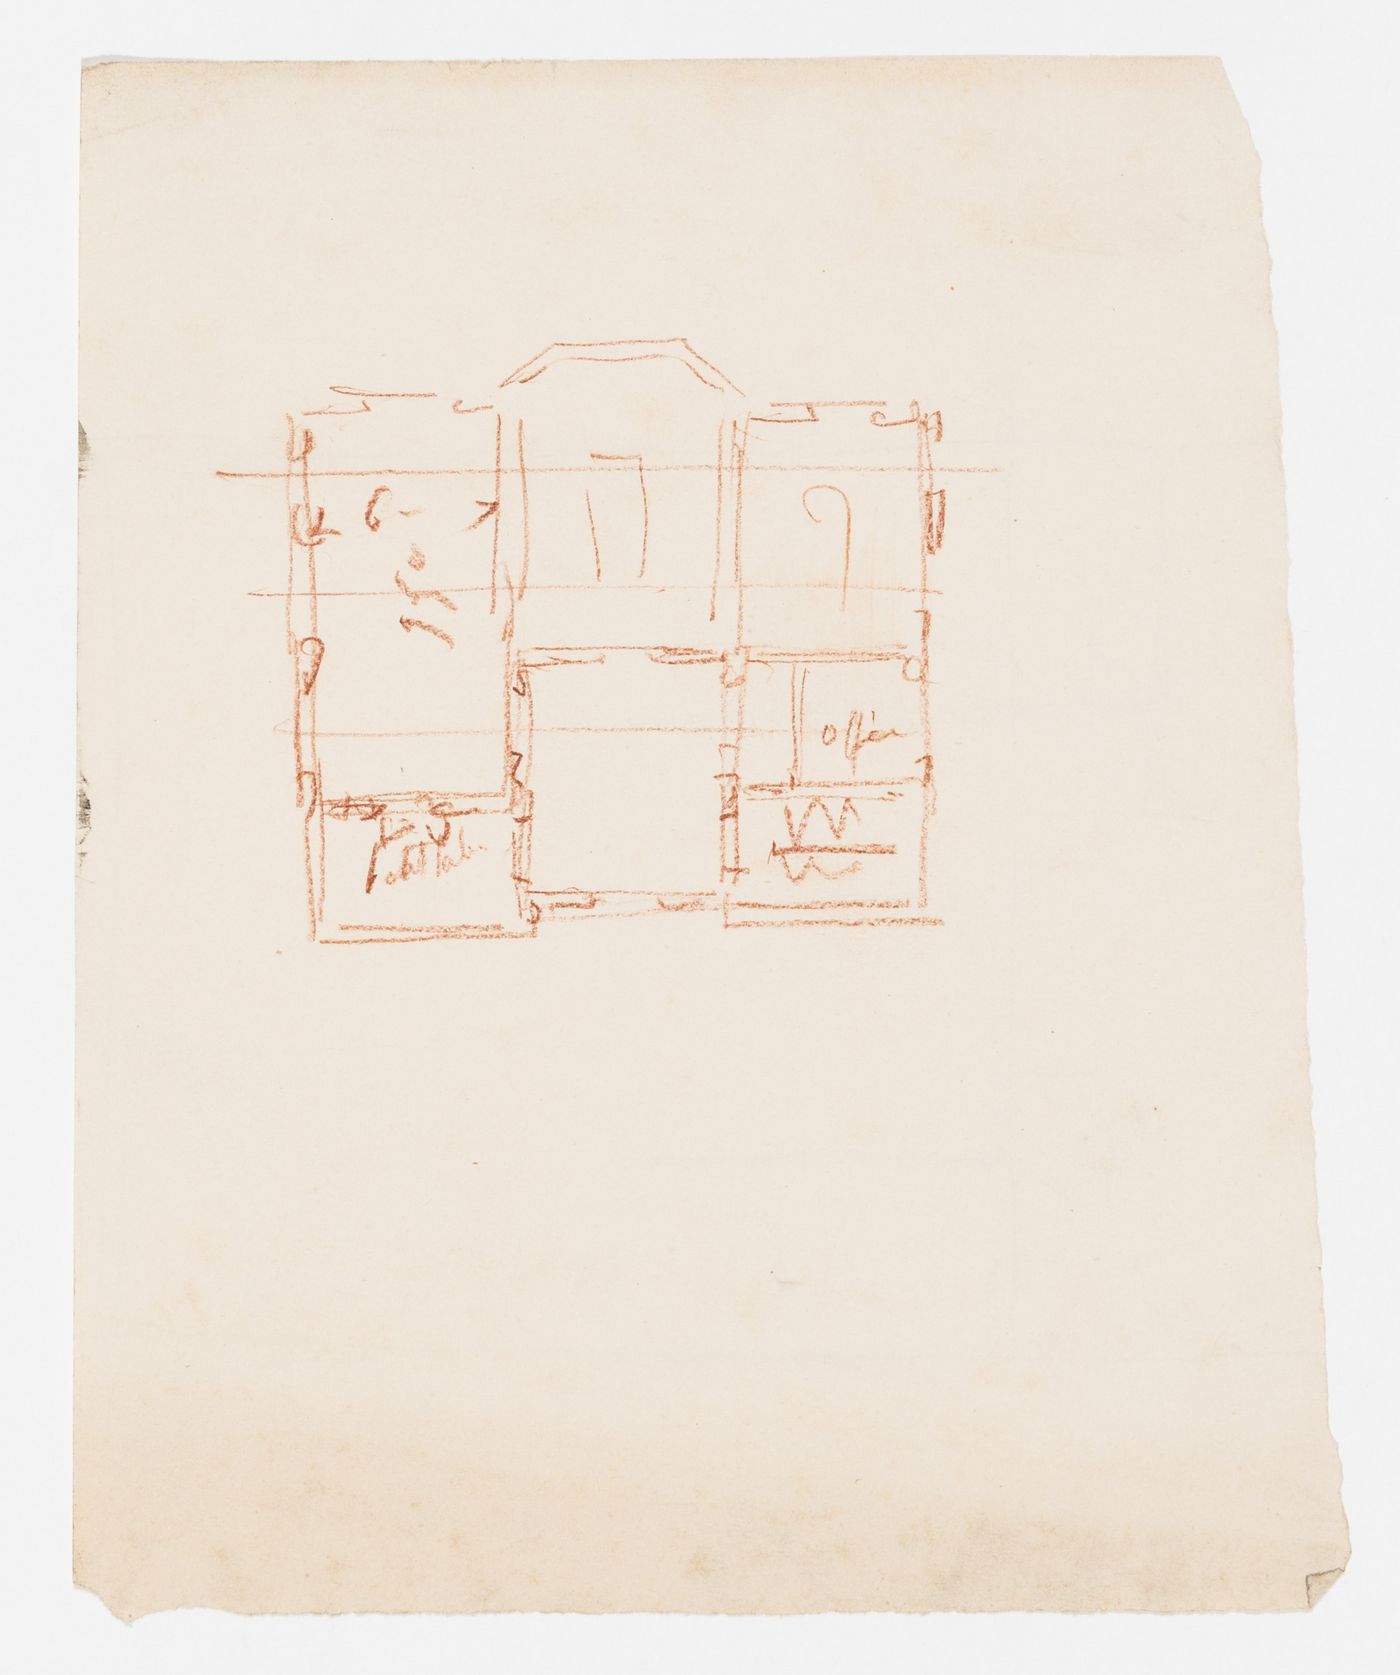 Project no. 2 for a country house for comte Treilhard: Sketch plan, possibly for the ground floor